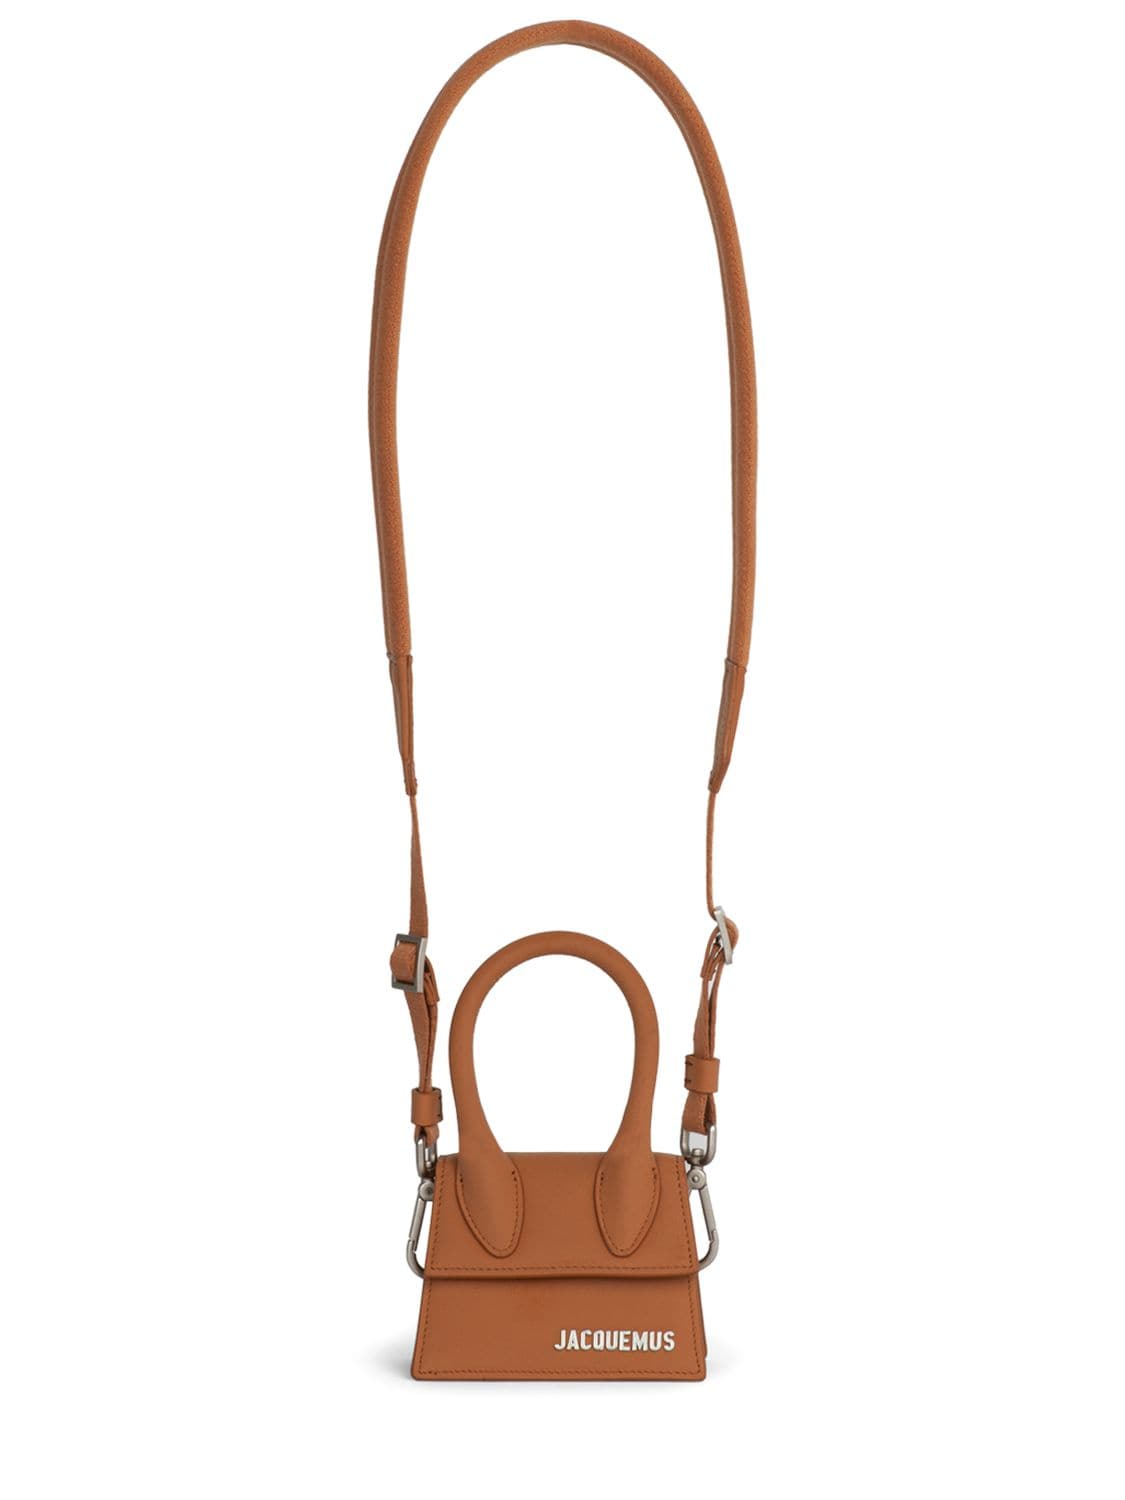 Jacquemus Le Chiquito Homme Crossbody Bag In Light Brown | ModeSens